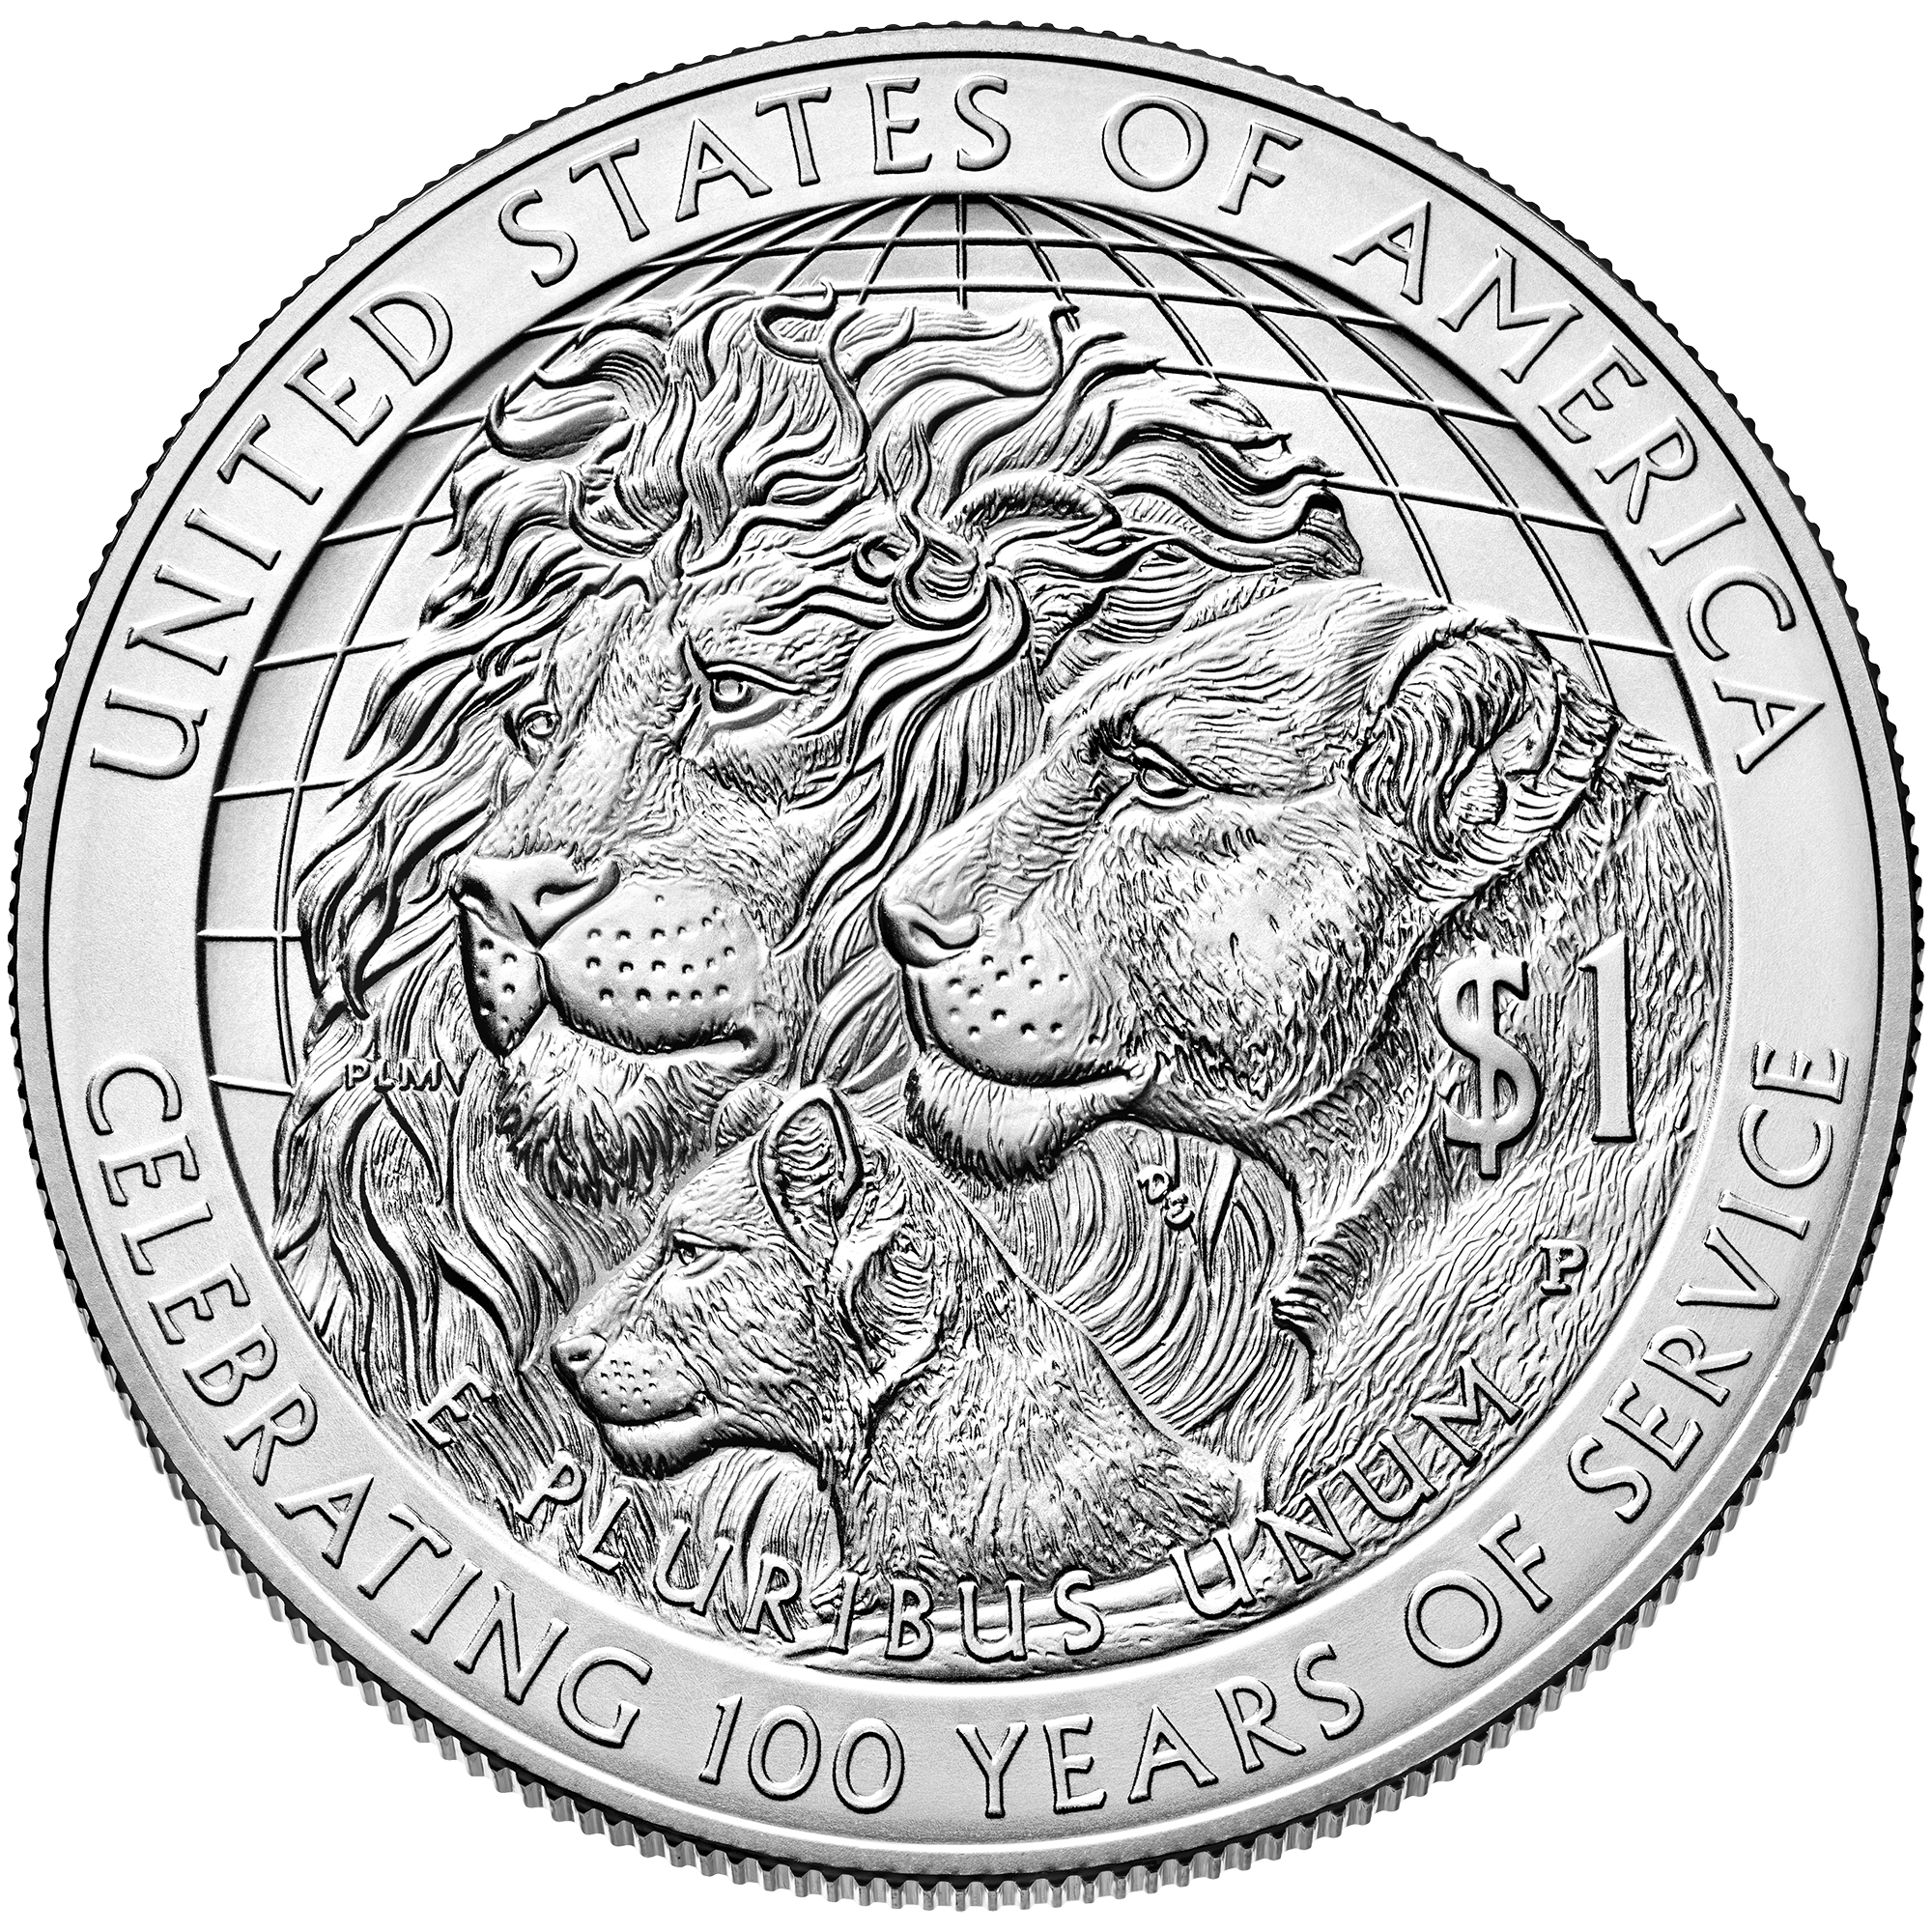 Reverse Uncirculted Lions Club 2017 Commemorative Silver Dollar Coin